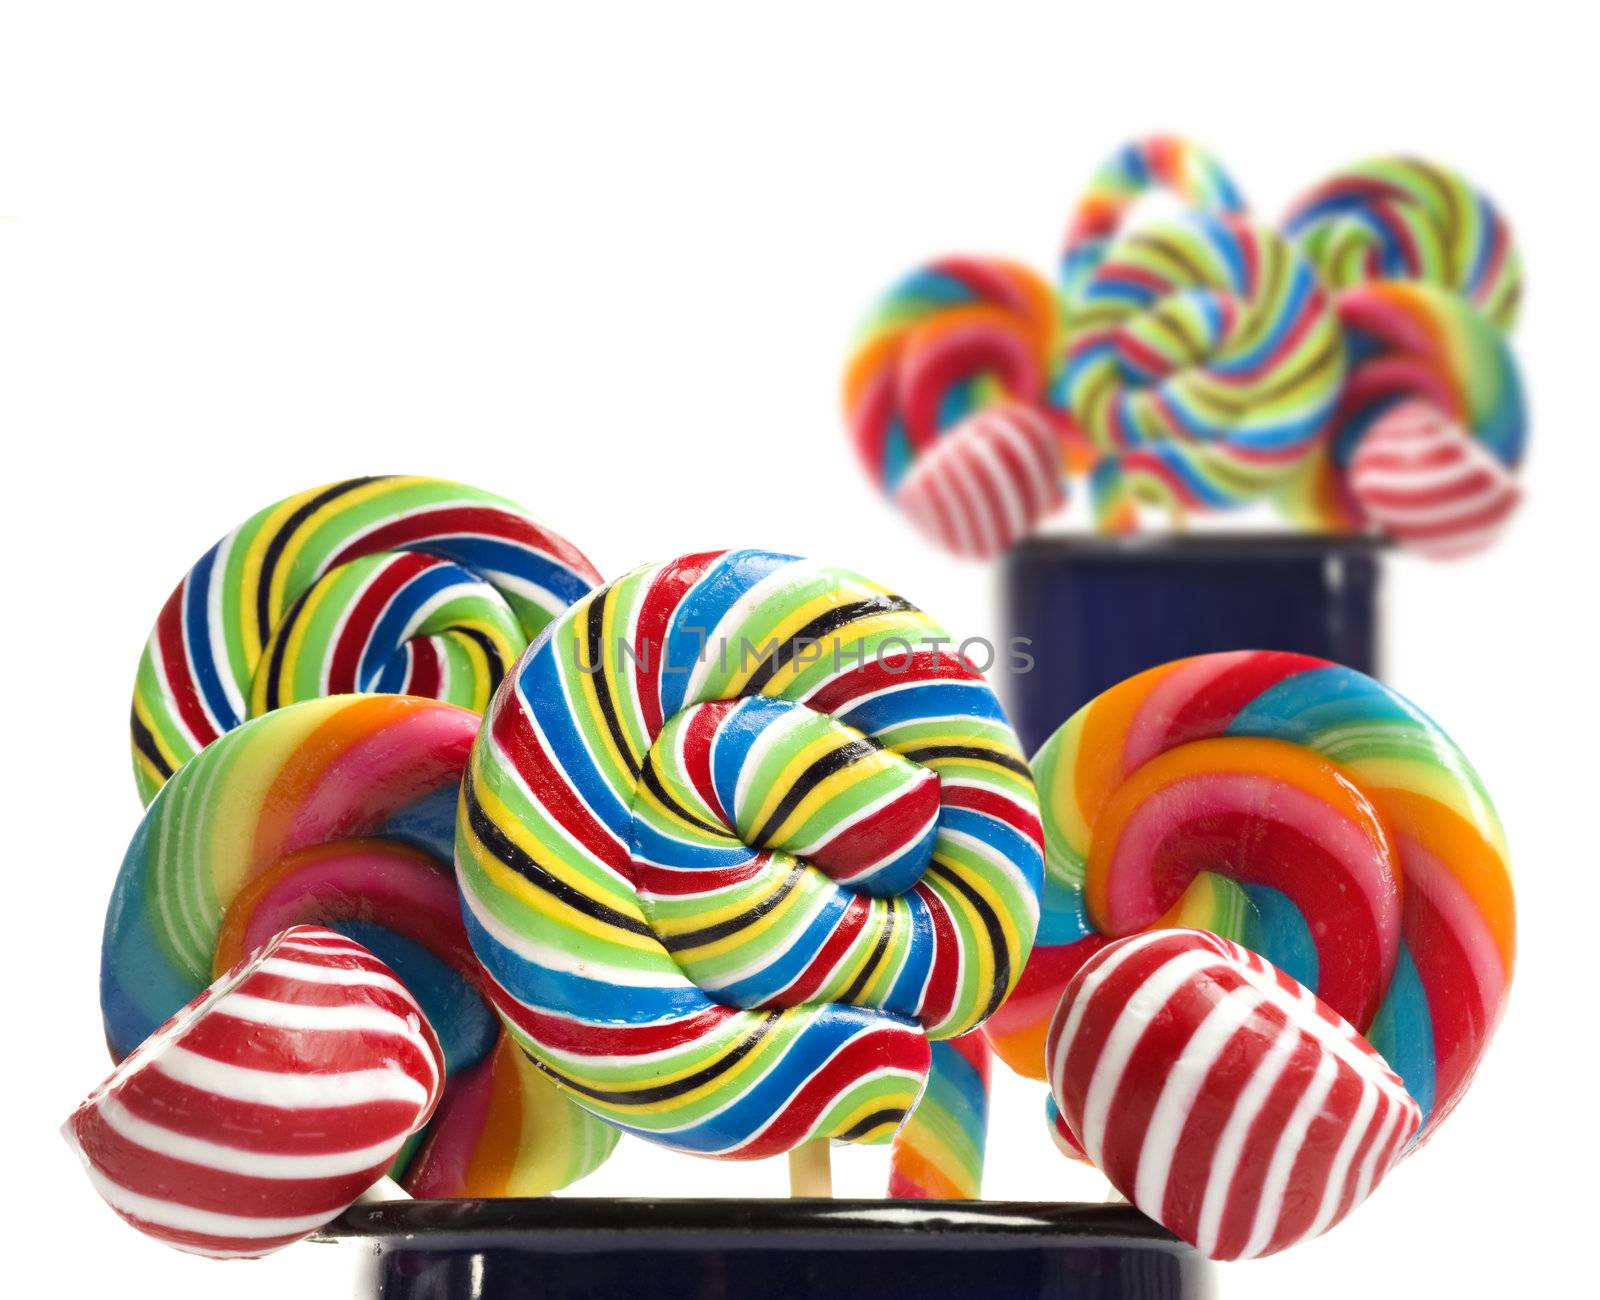 Sugar candy cane lollipop collection by tish1